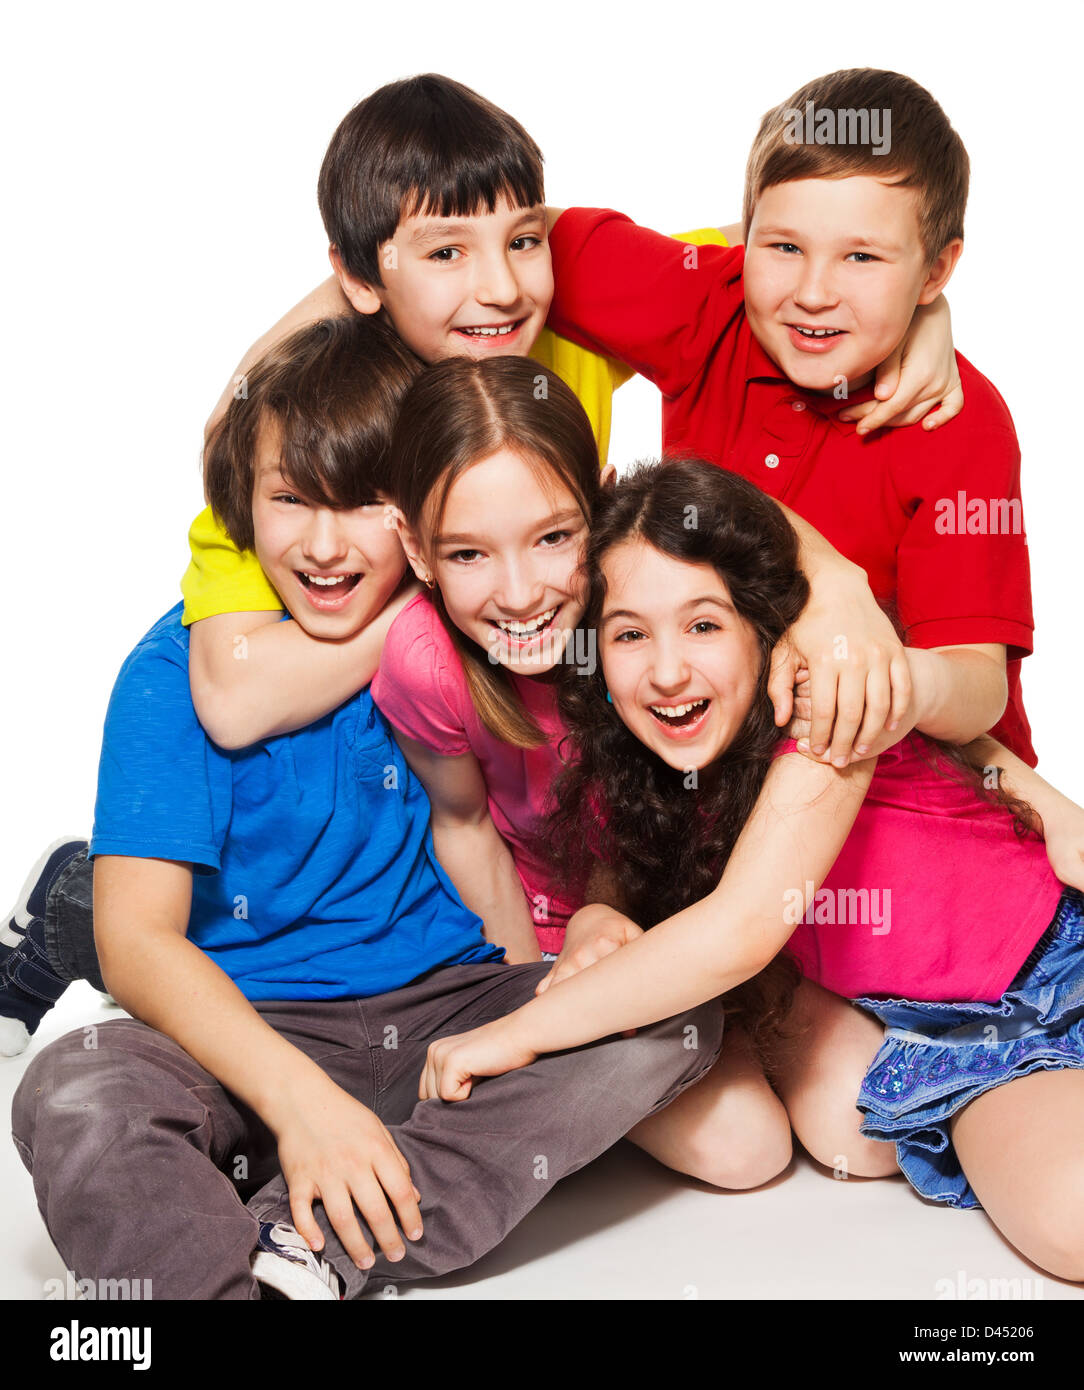 Group of happy kids sitting together and having fun Stock Photo